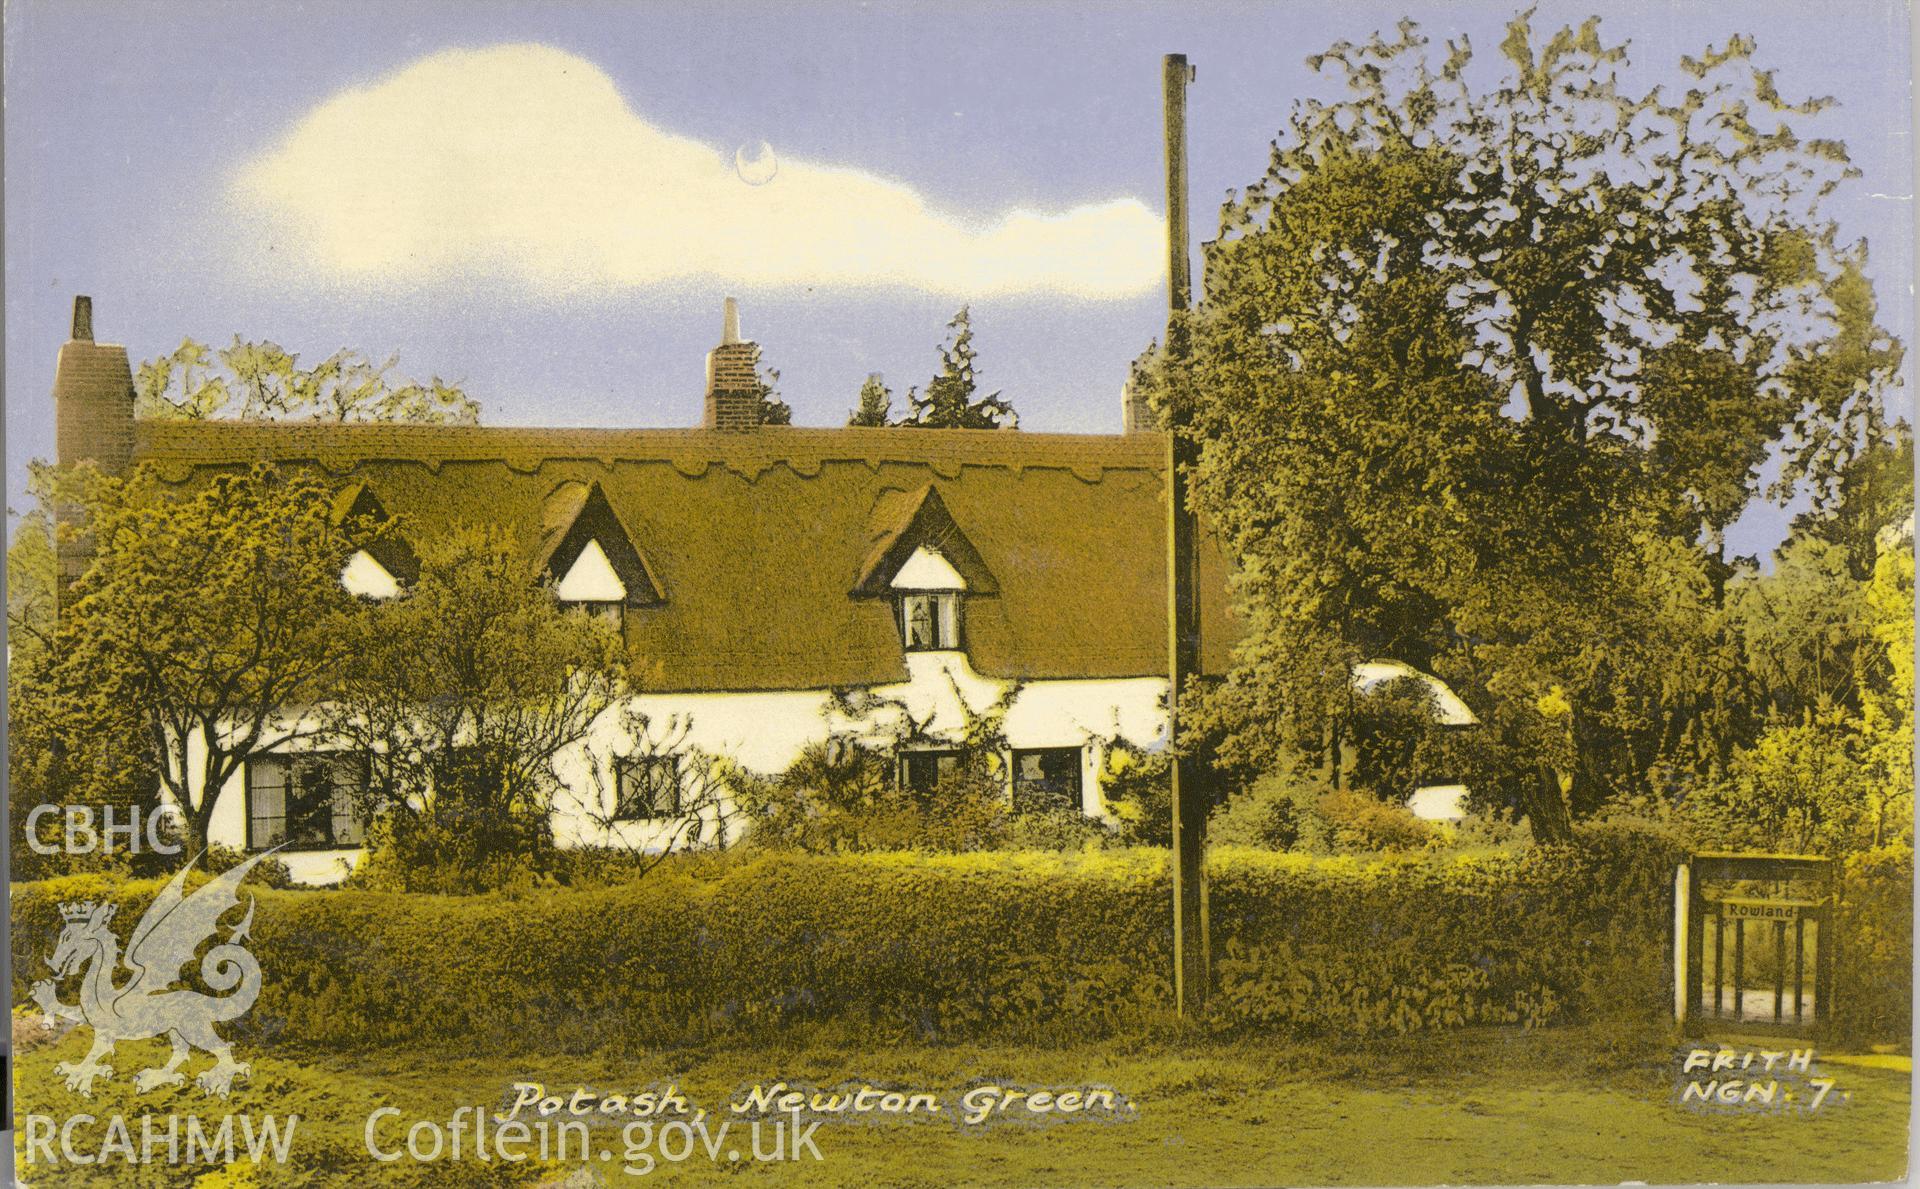 Digitised postcard image of thatched cottage called Potash or Rowland, Newton Green, F. Frith & Co., Ltd. Produced by Parks and Gardens Data Services, from an original item in the Peter Davis Collection at Parks and Gardens UK. We hold only web-resolution images of this collection, suitable for viewing on screen and for research purposes only. We do not hold the original images, or publication quality scans.